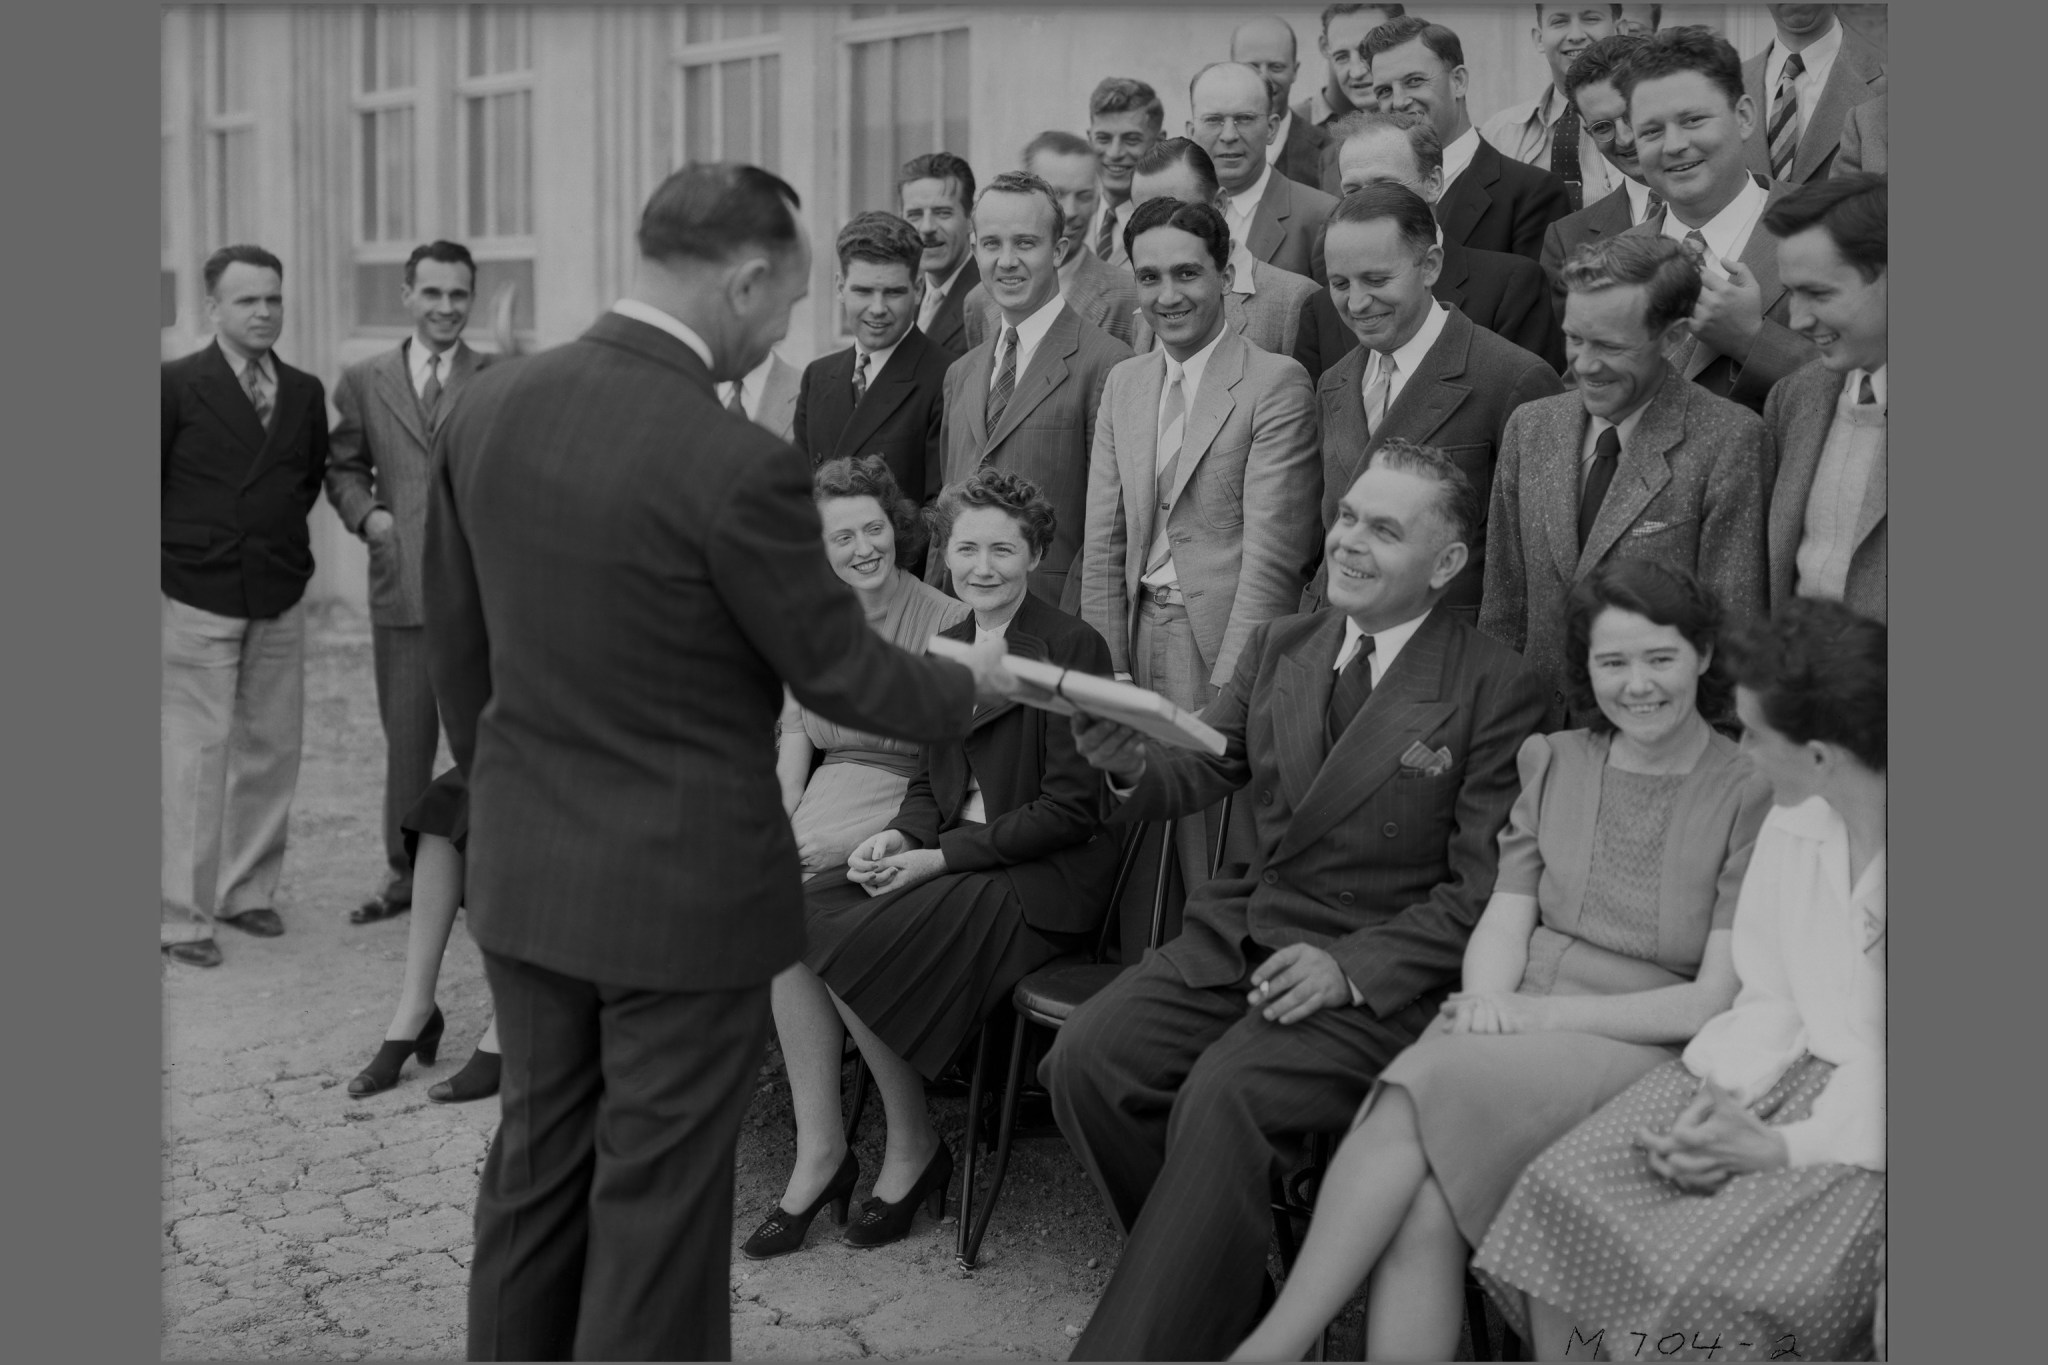 Photograph of Ames Aeronautical Laboratory Director Smith DeFrance greeting original staff members just before before a group photo is taken.